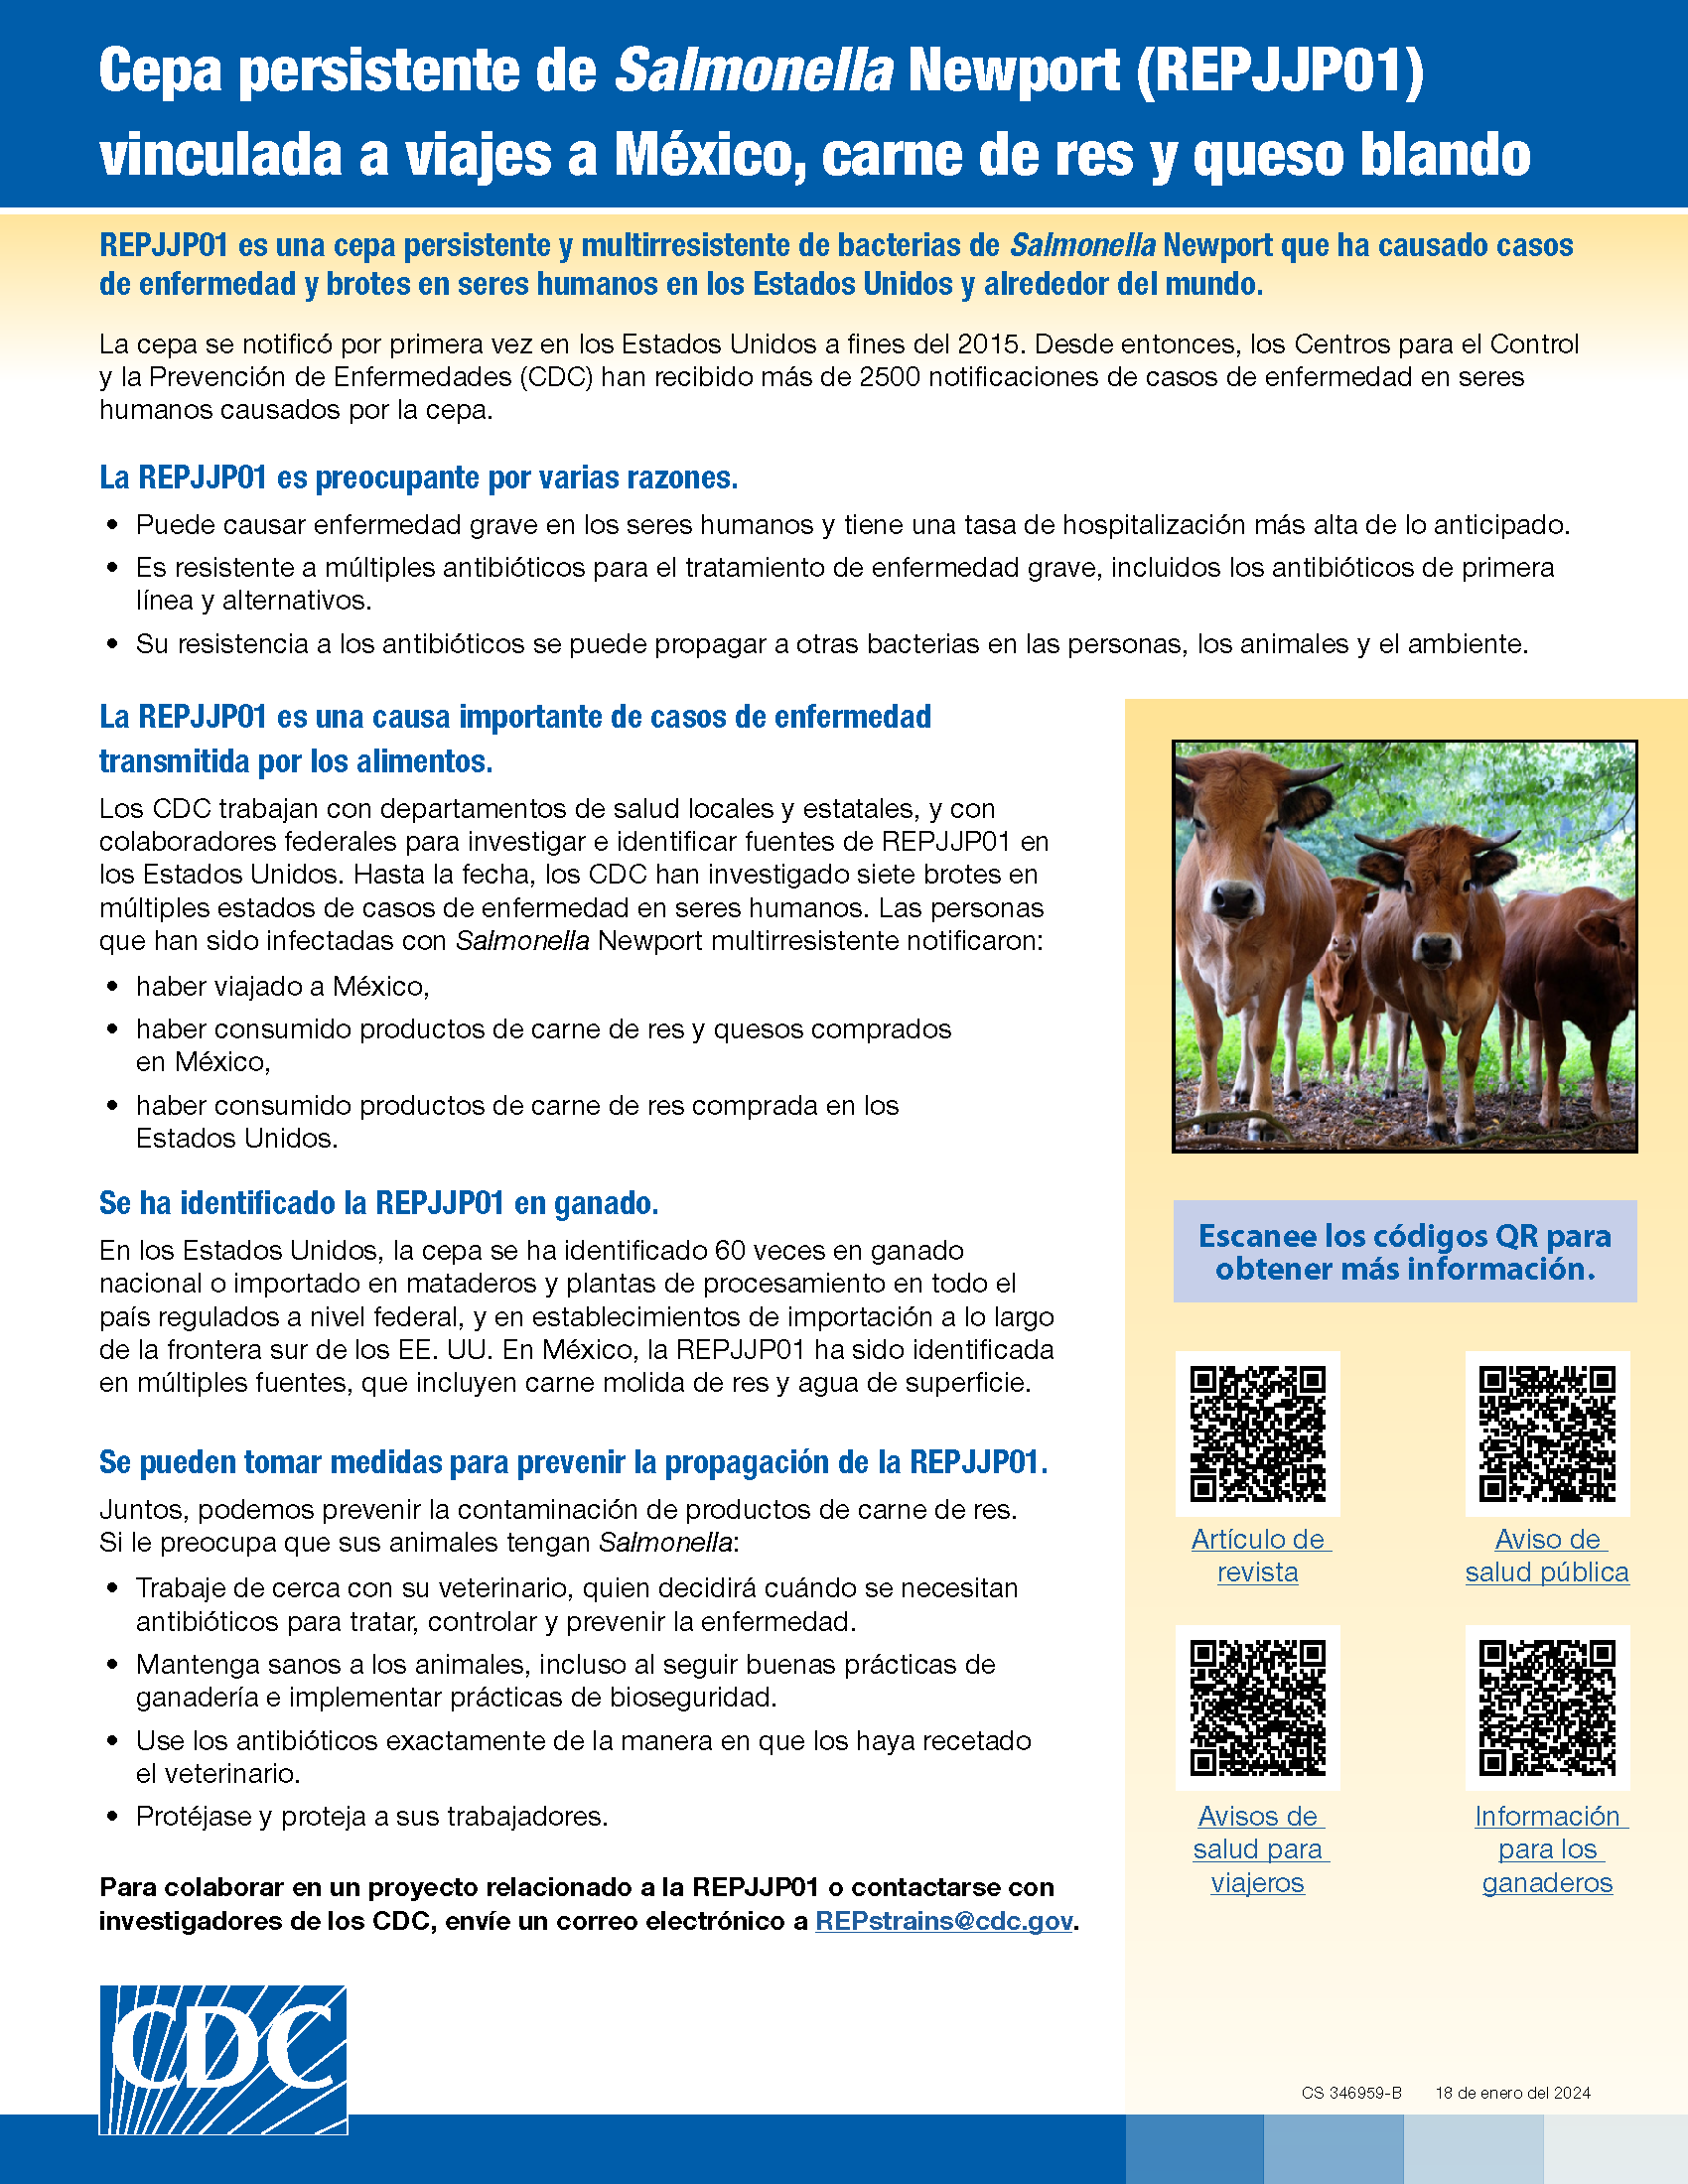 CDC Guidance in Spainish